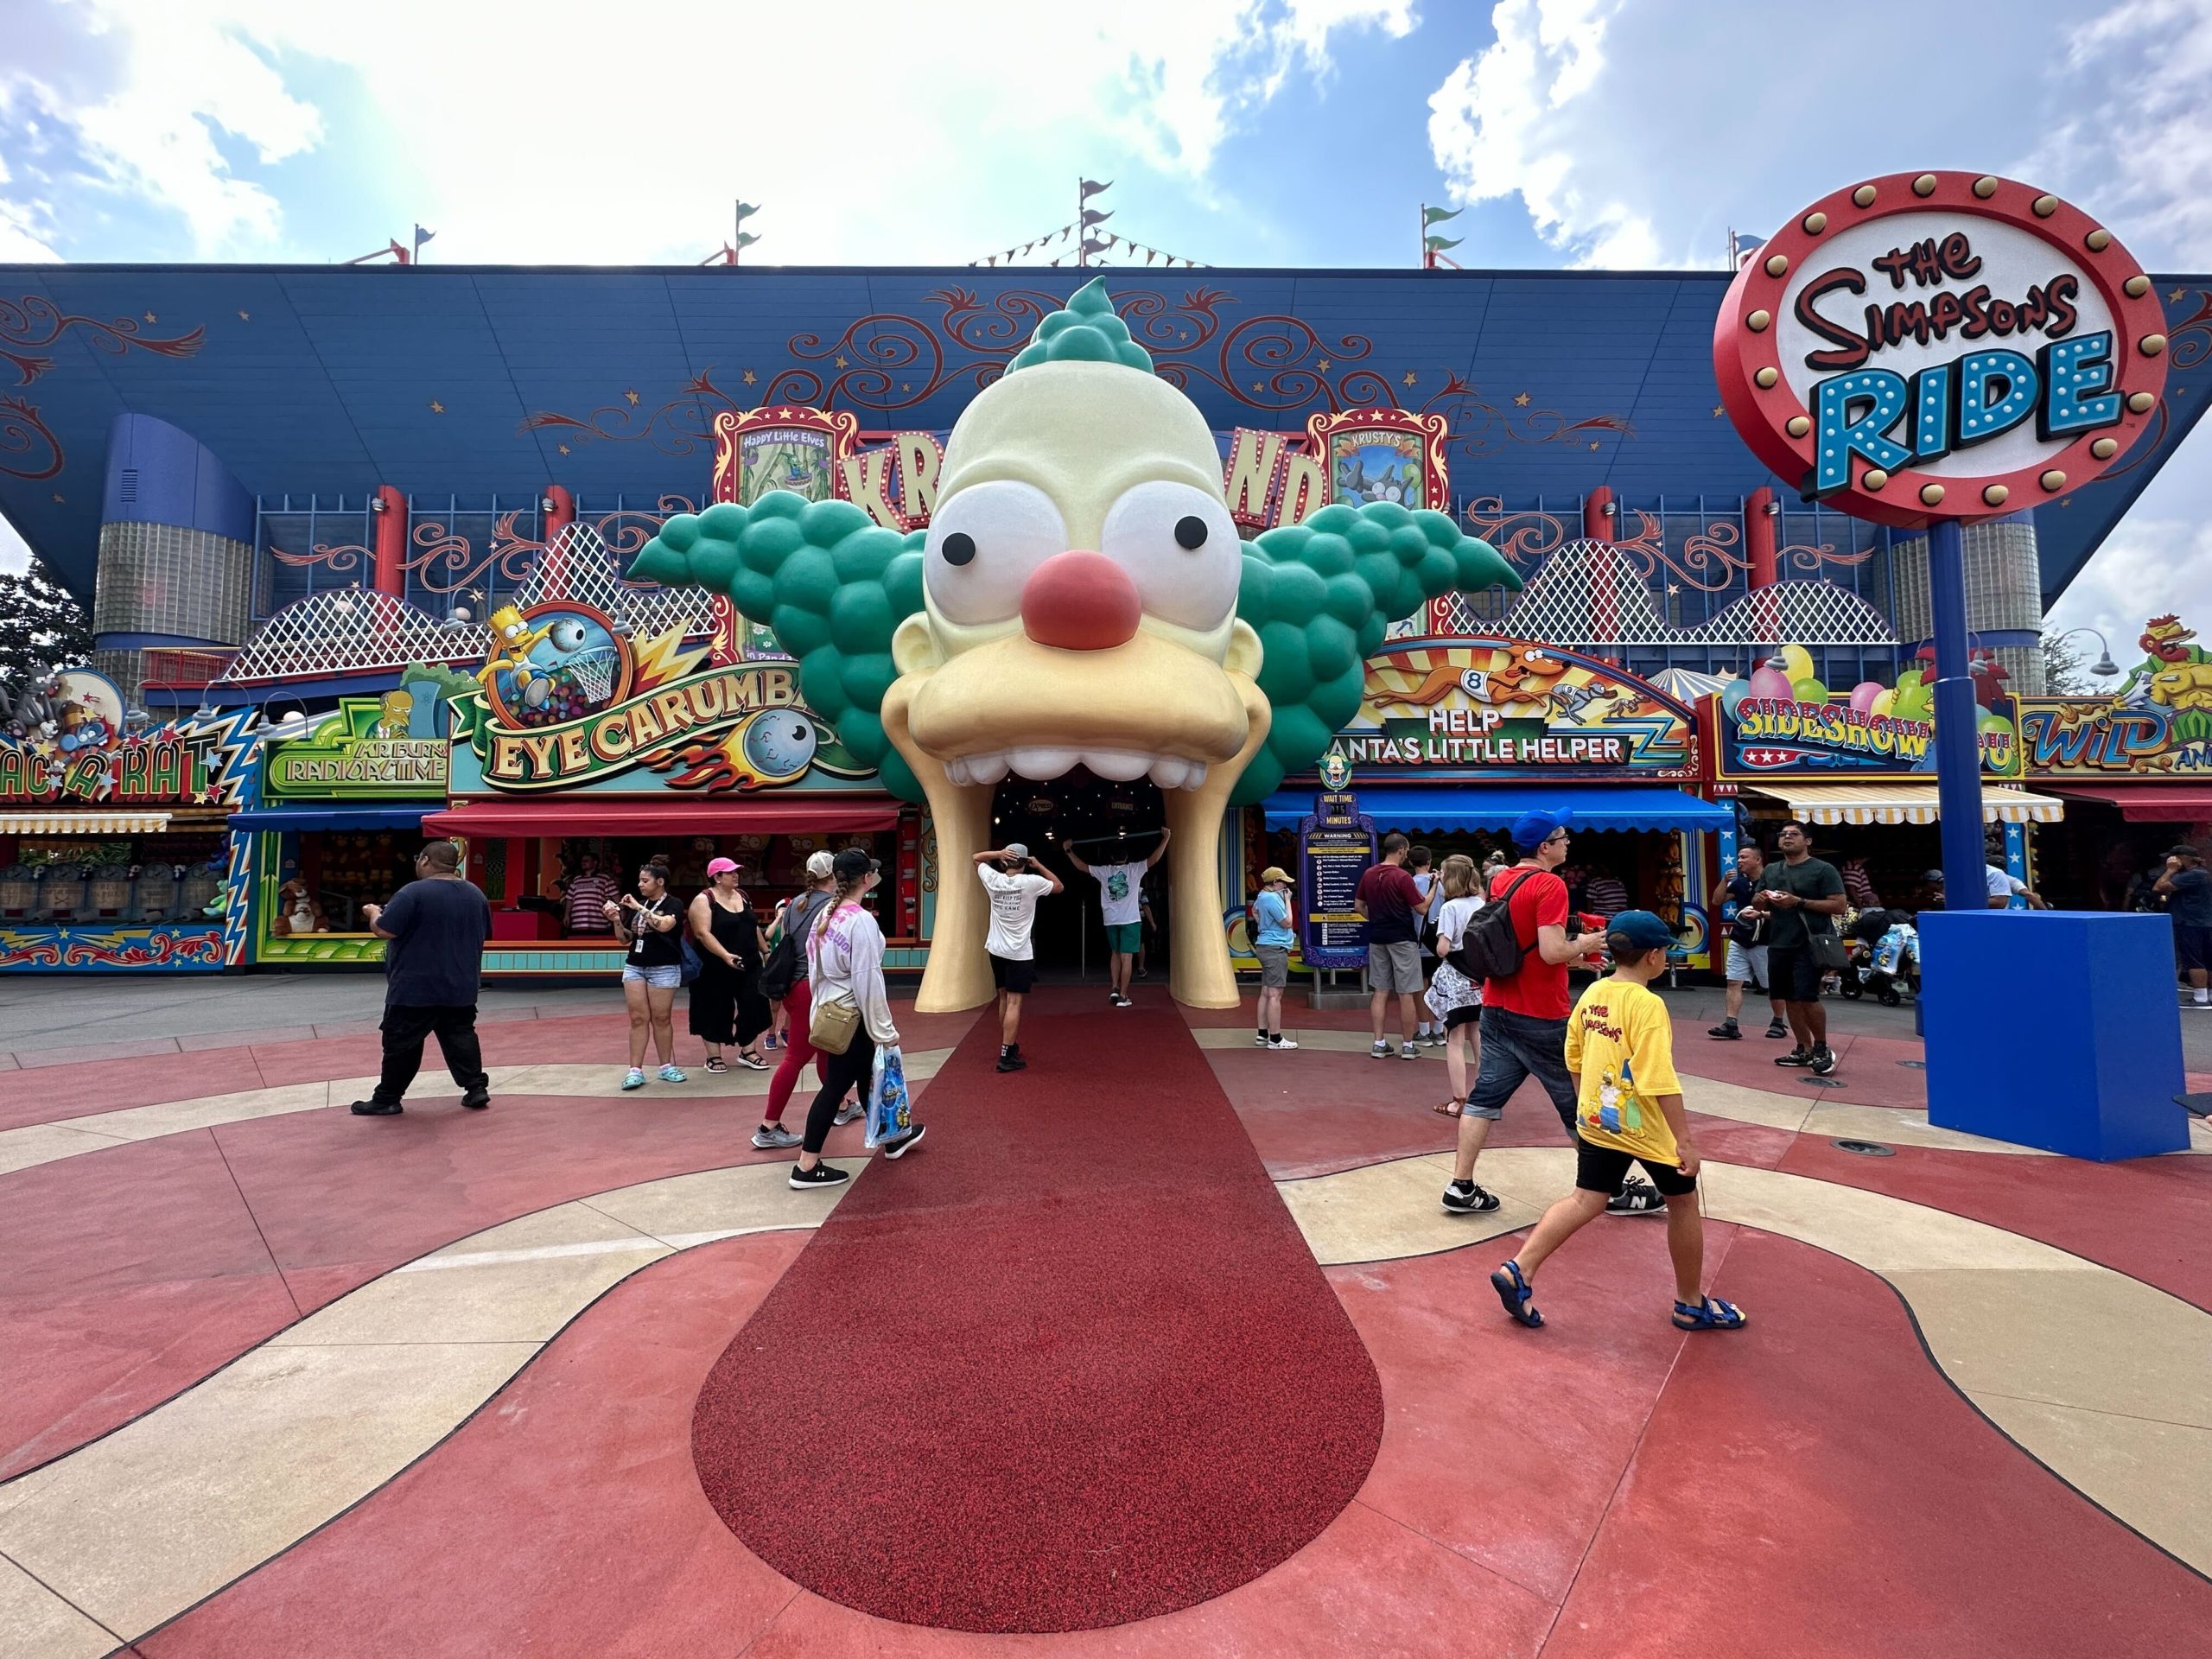 The Simpsons Ride entrance where you walk into the clown's mouth